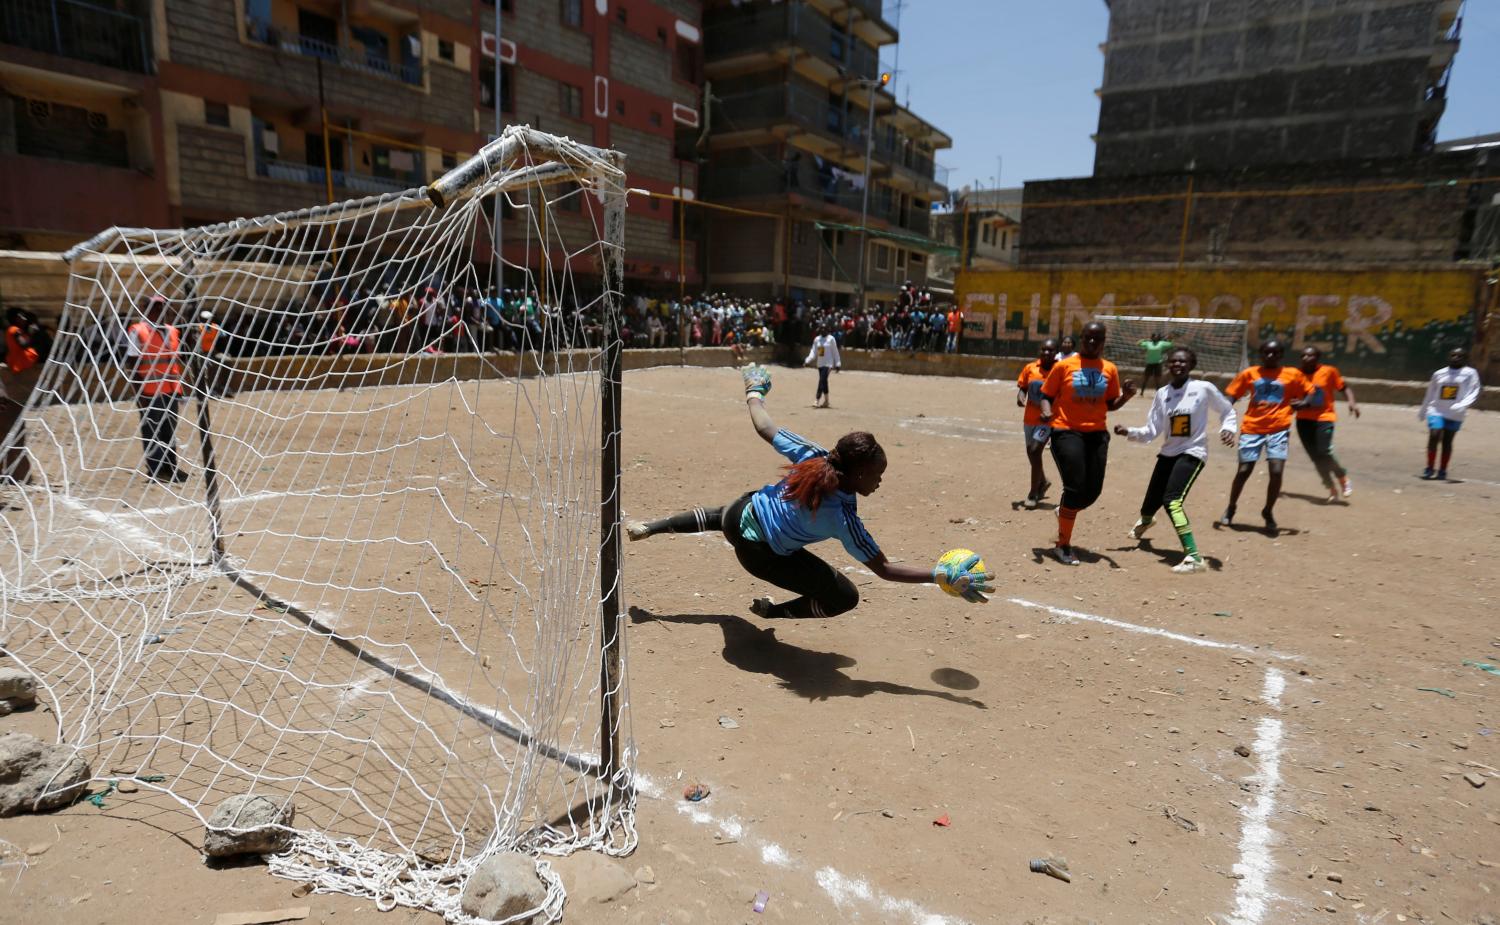 A female goalkeeper saves the ball at the Mathare Environmental Conservation Youth Centre during a soccer match to celebrate the International Women's day in Nairobi, Kenya, March 8, 2017. REUTERS/Thomas Mukoya - RC1A35B15000